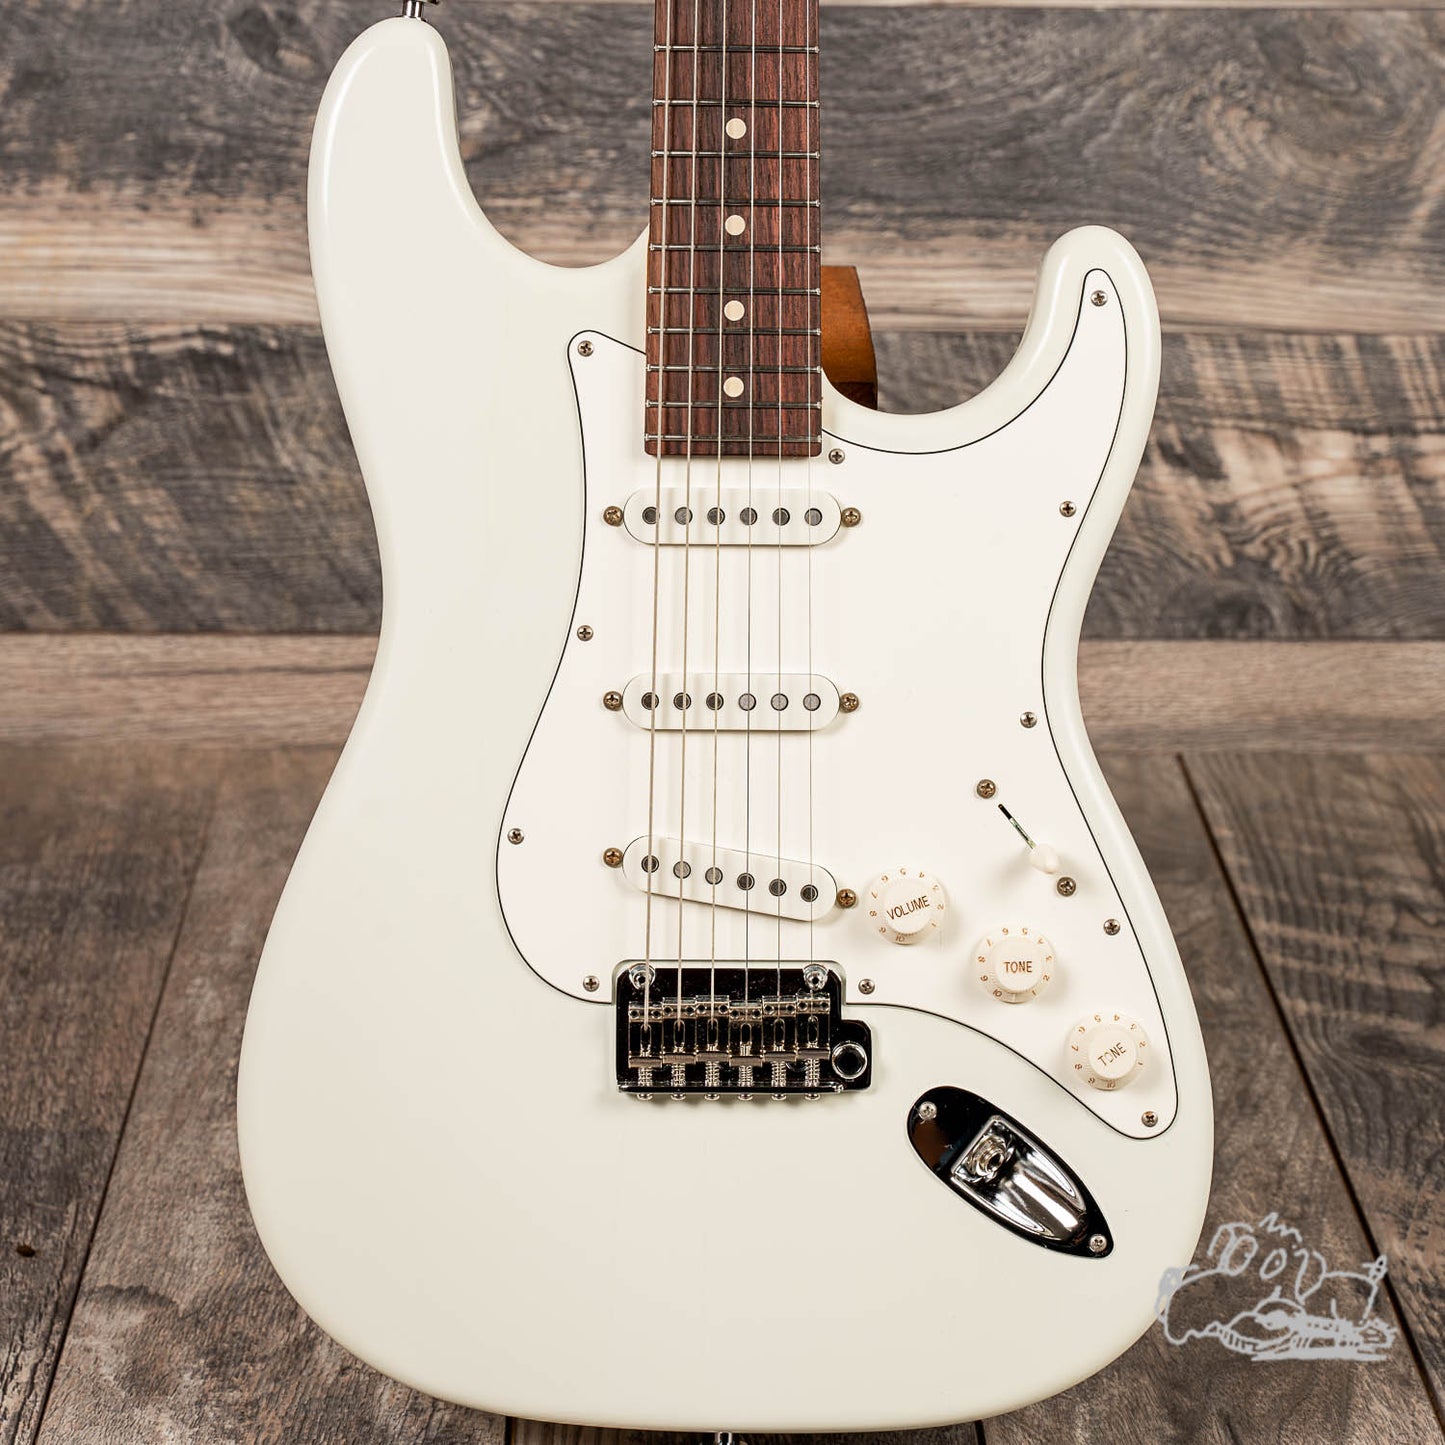 2019 Suhr Classic S Antique in Olympic White with Indian Rosewood Board